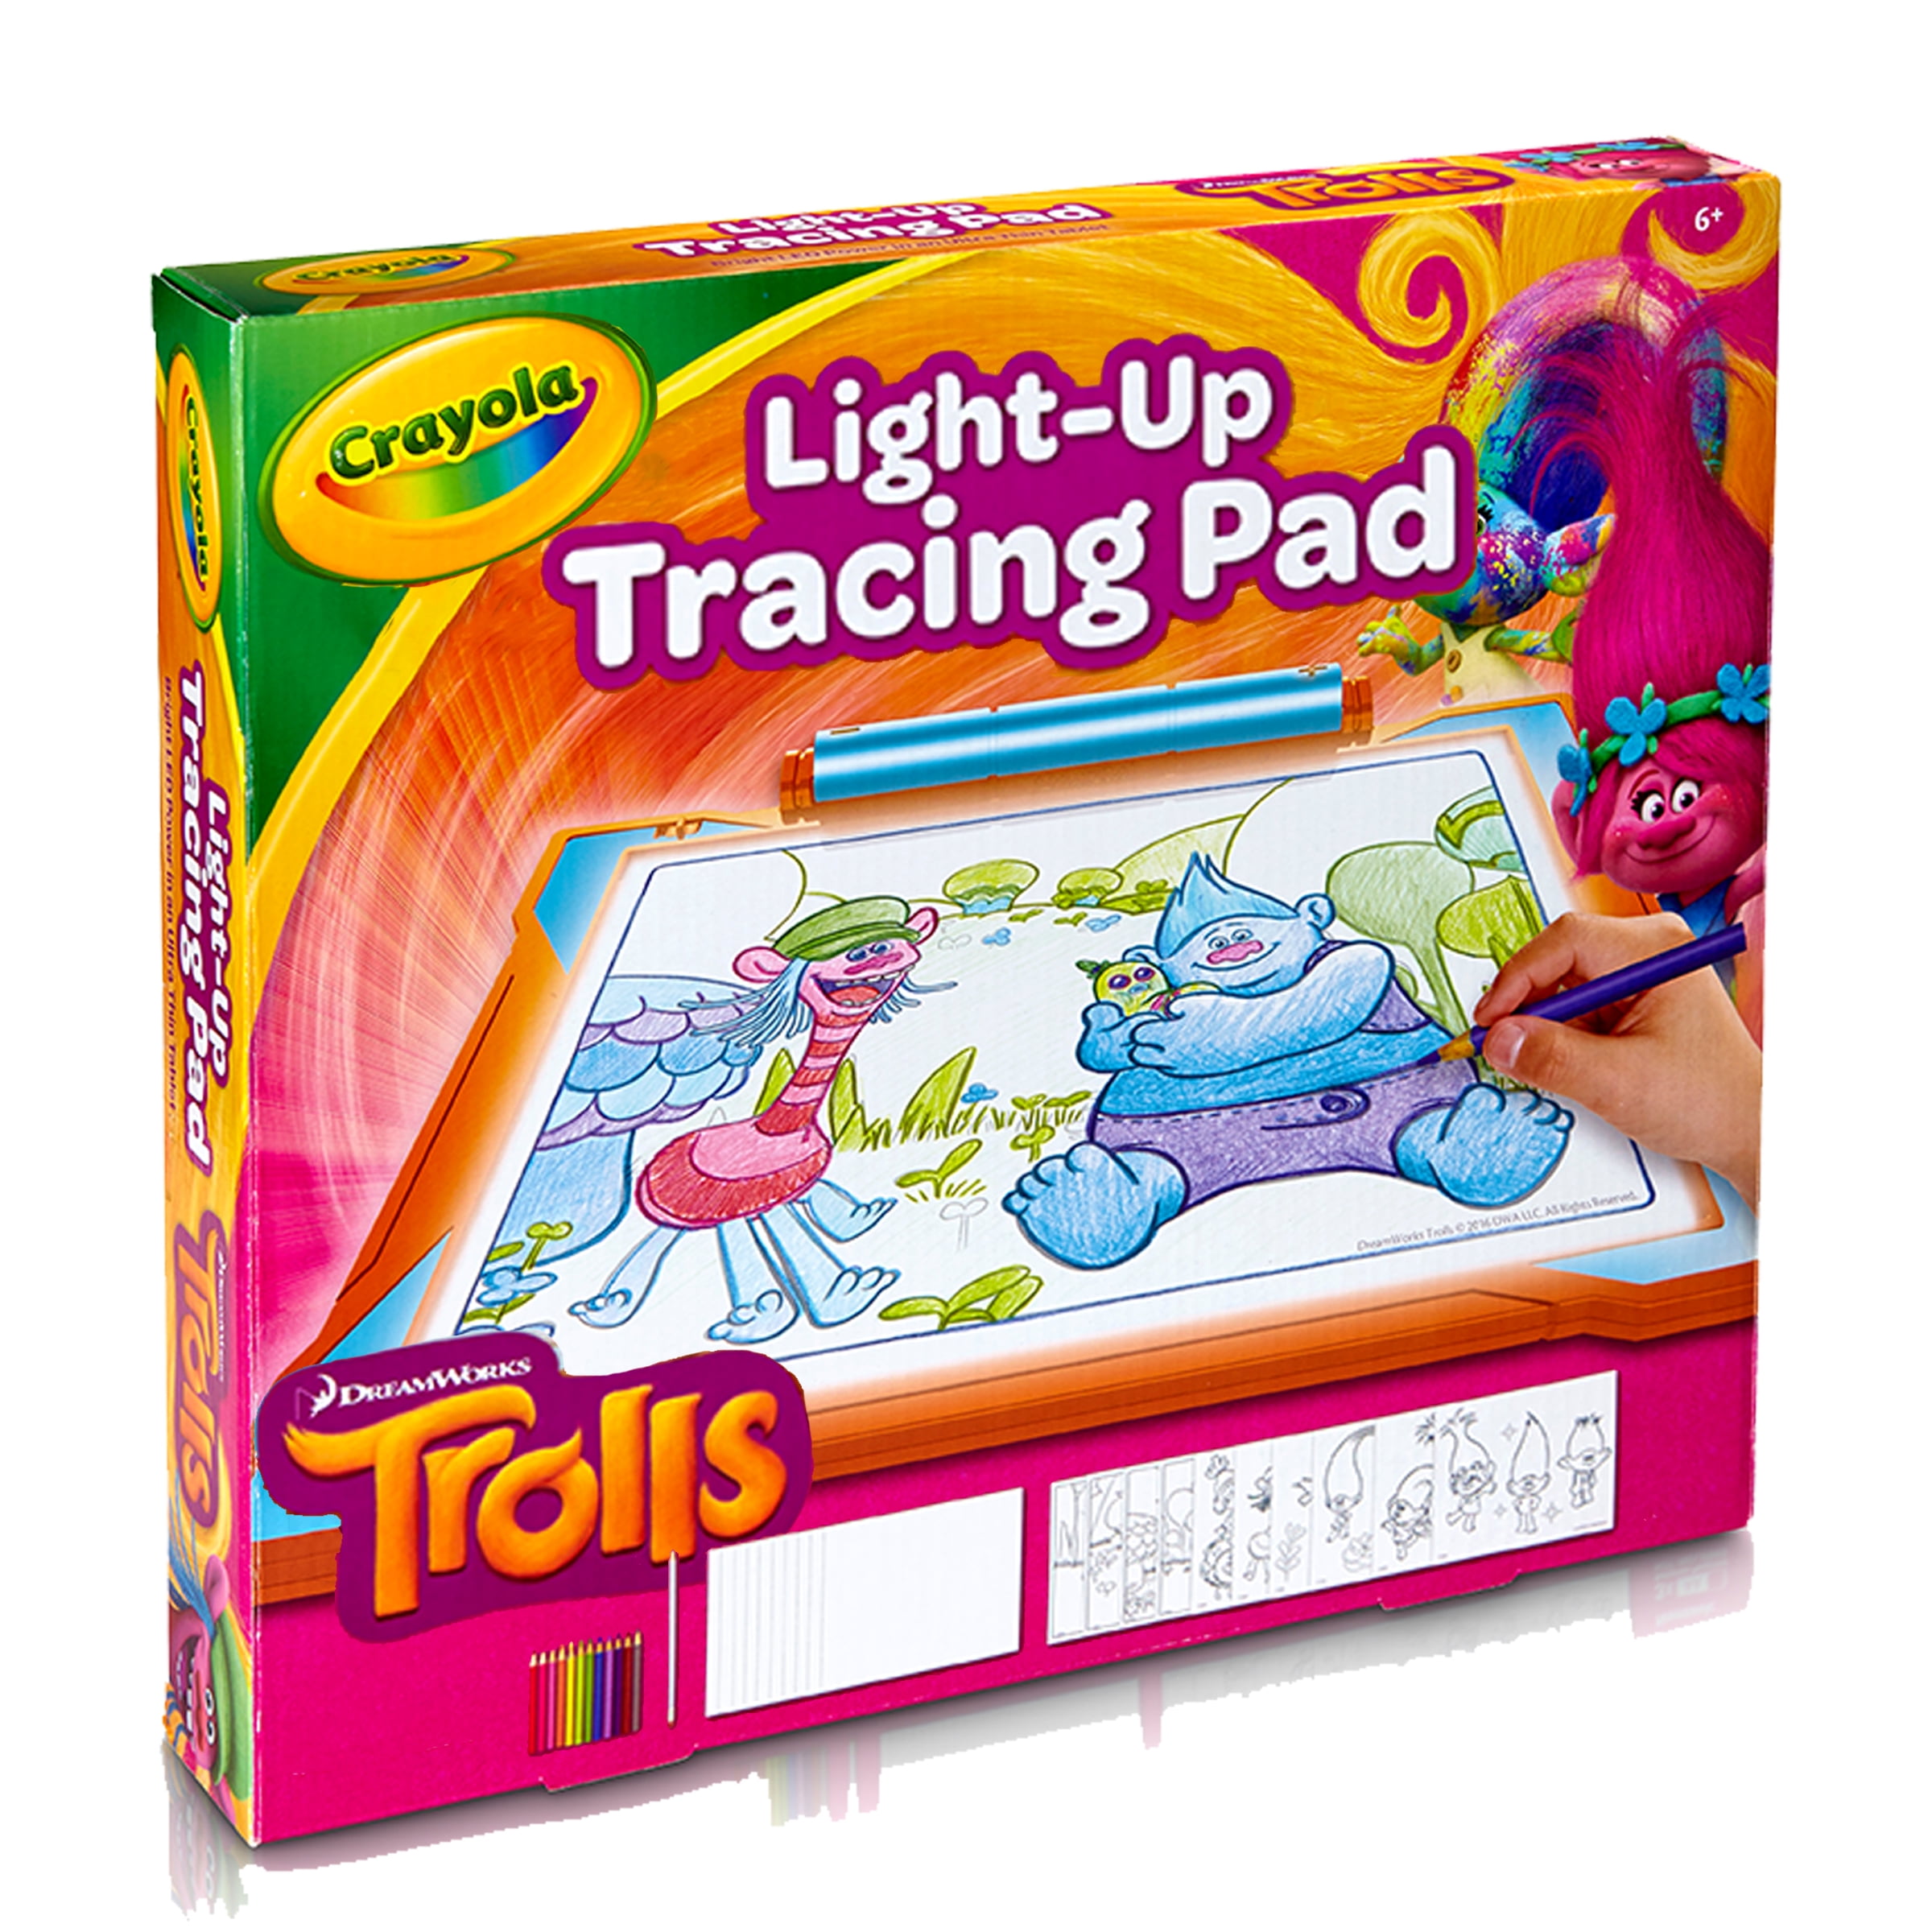  Crayola Light Up Tracing Pad with Night Mode and Colored Pencil  Set, Gift, Ages 6, 7, 8, 9, 10 : Toys & Games